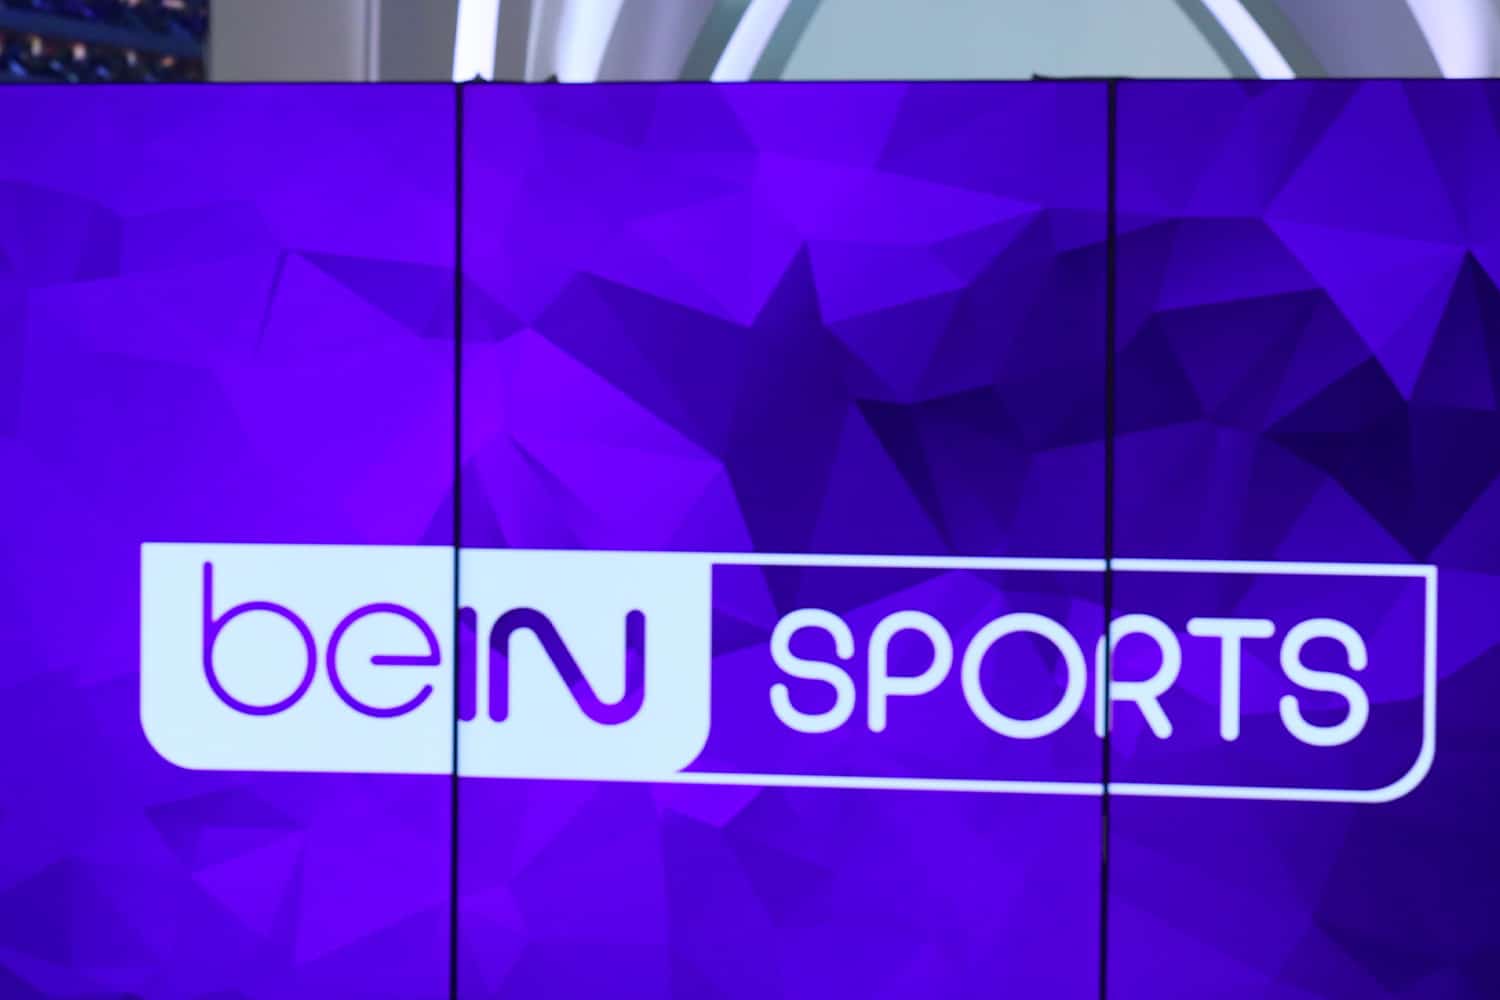 Saudi Arabia Pivots, Now Wants to Buy In on BeIn